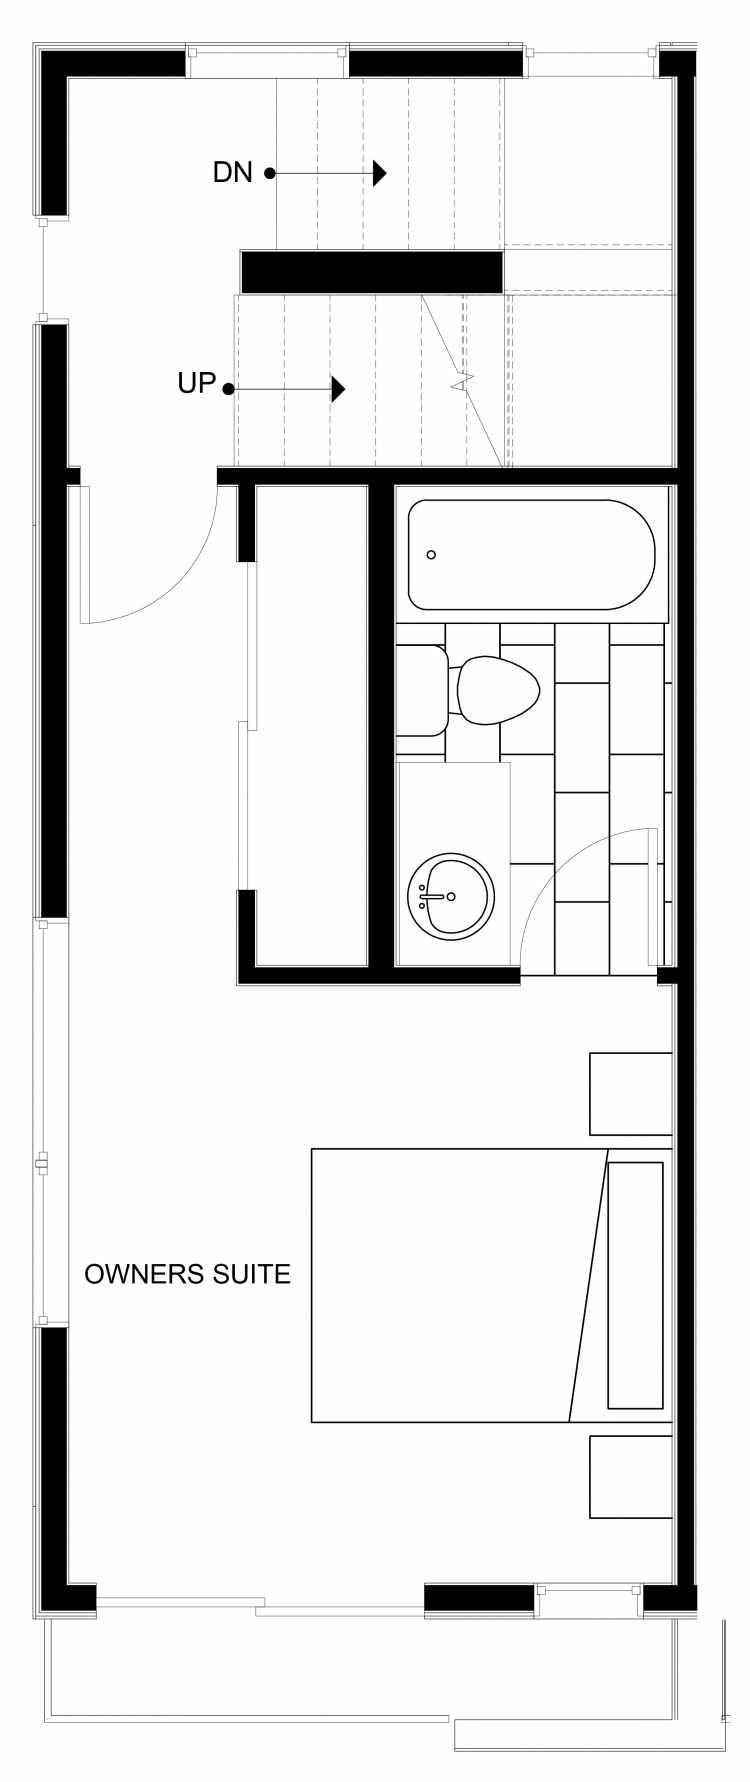 Fourth Floor Plan of 1544 15th Ave E, One of the Larrabee Townhomes in Capitol Hill